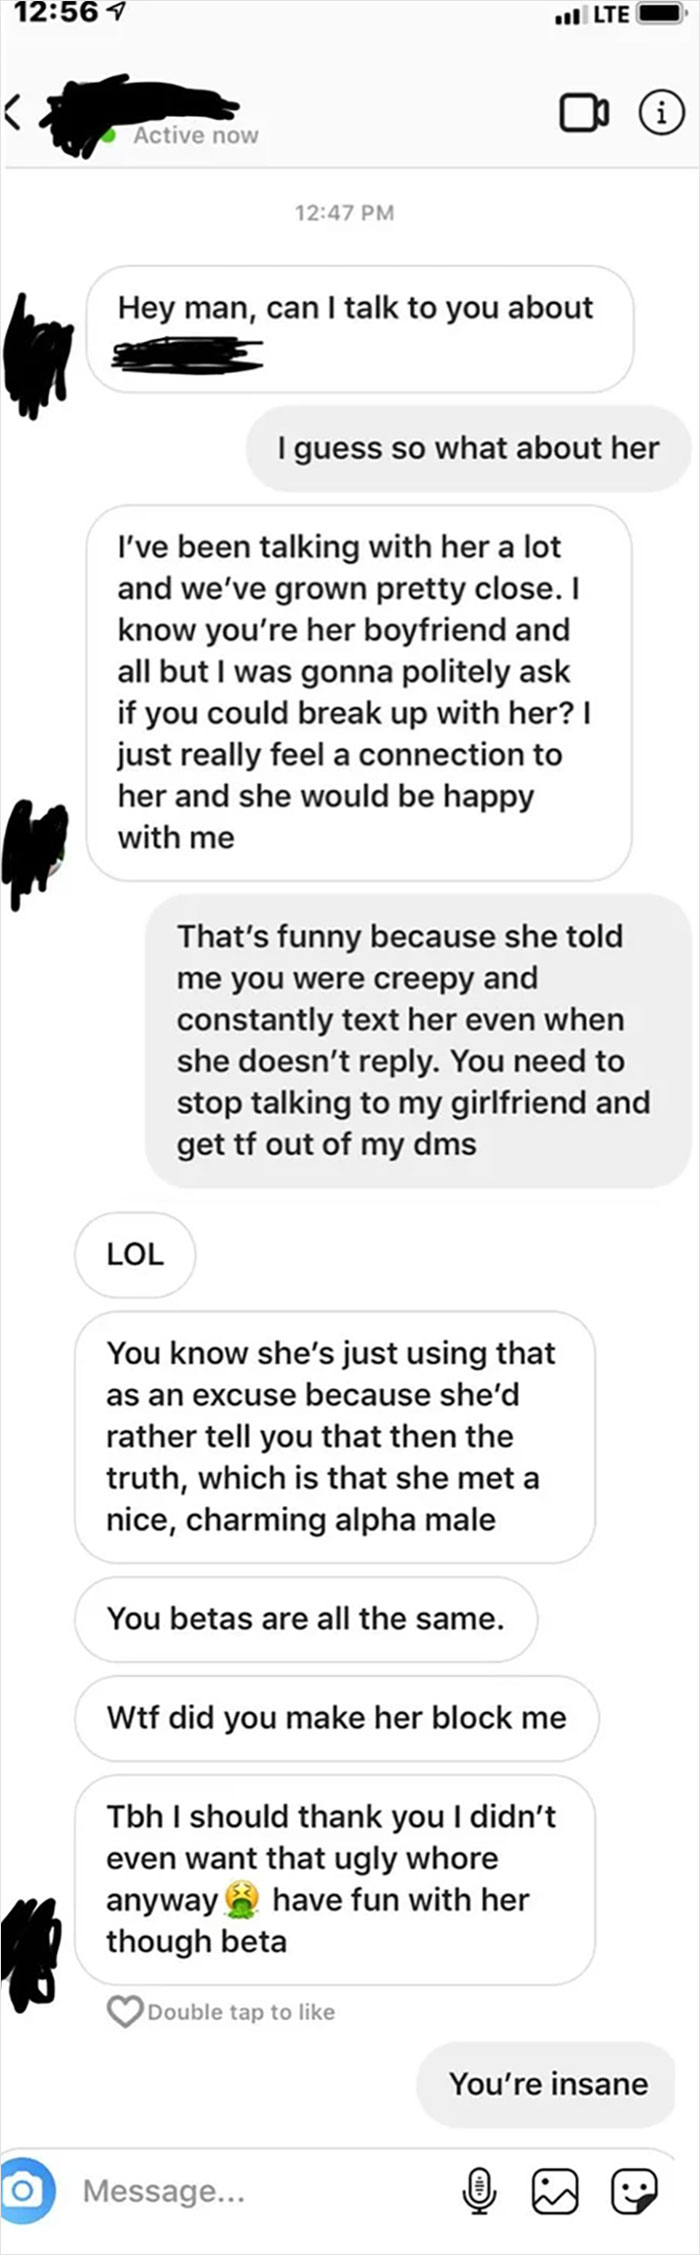 Charming Alpha Male Asks Me To Break Up With My Girlfriend For Him